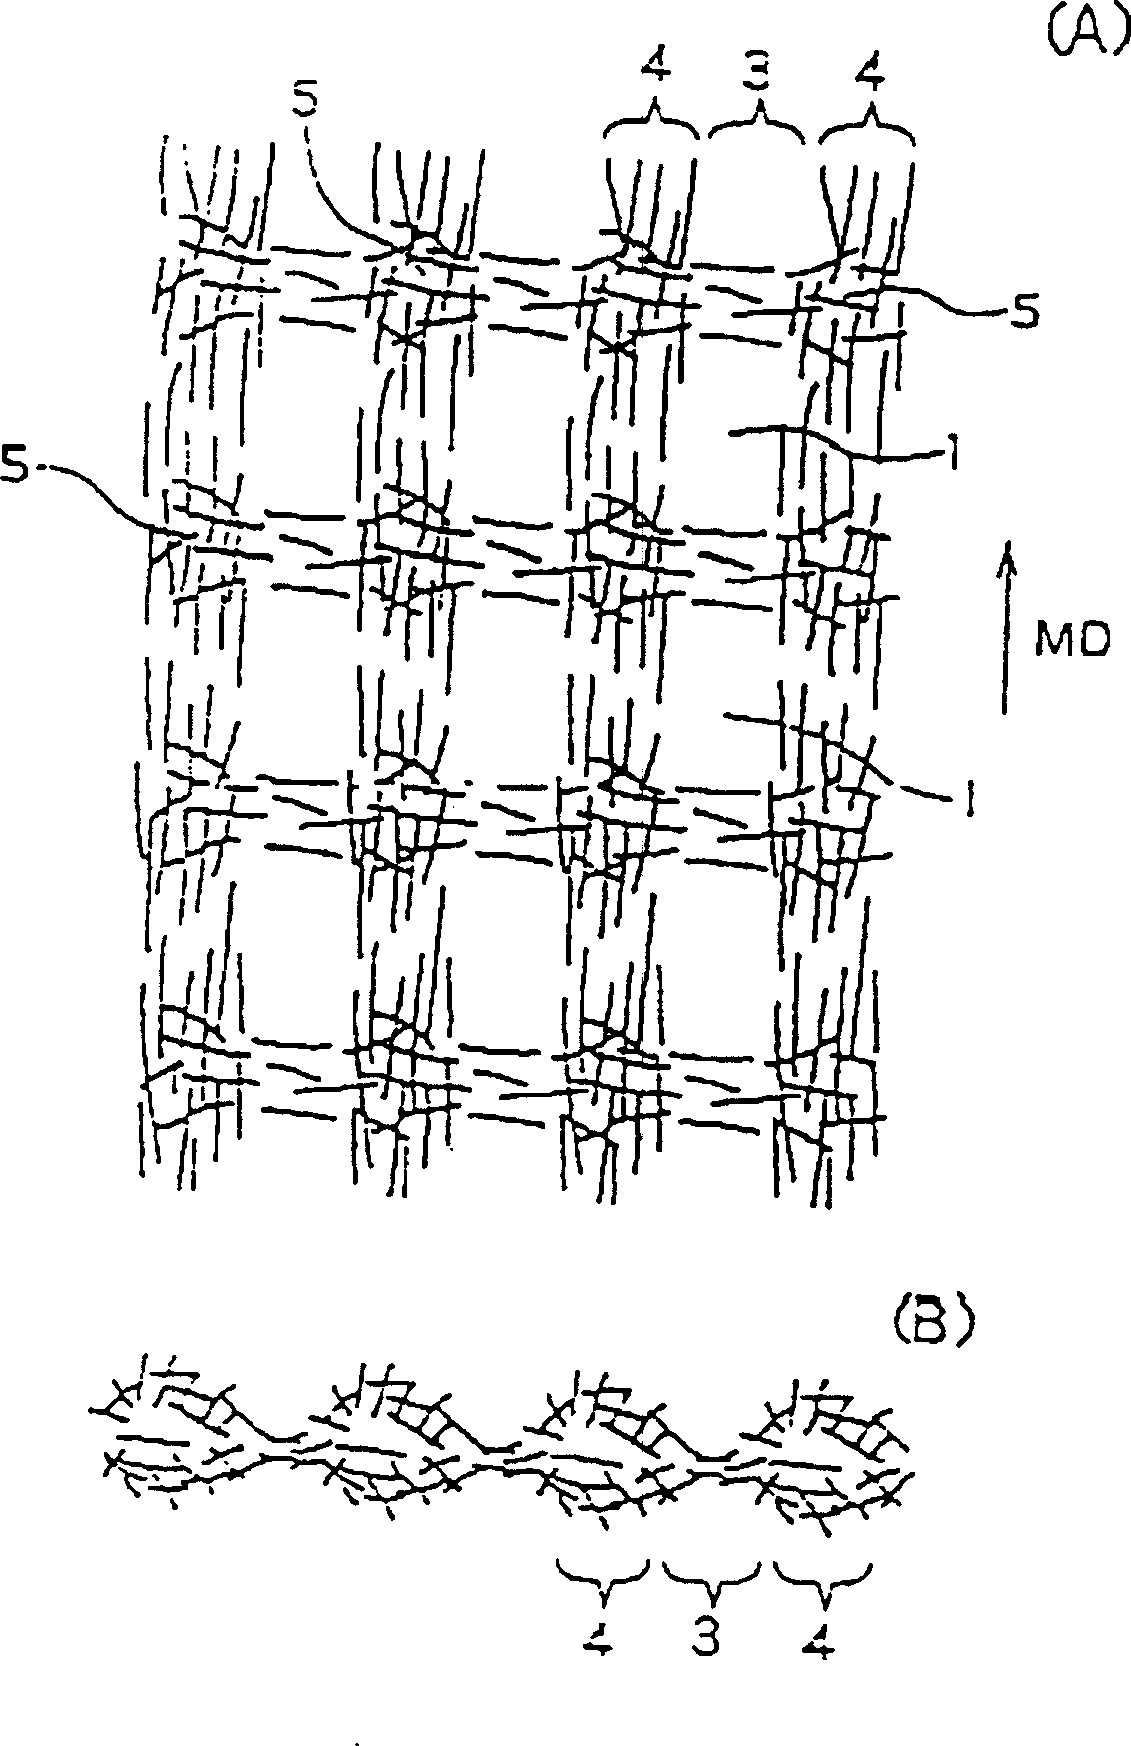 Hydrolytic non-woven fabric and article employing the same for cleaning